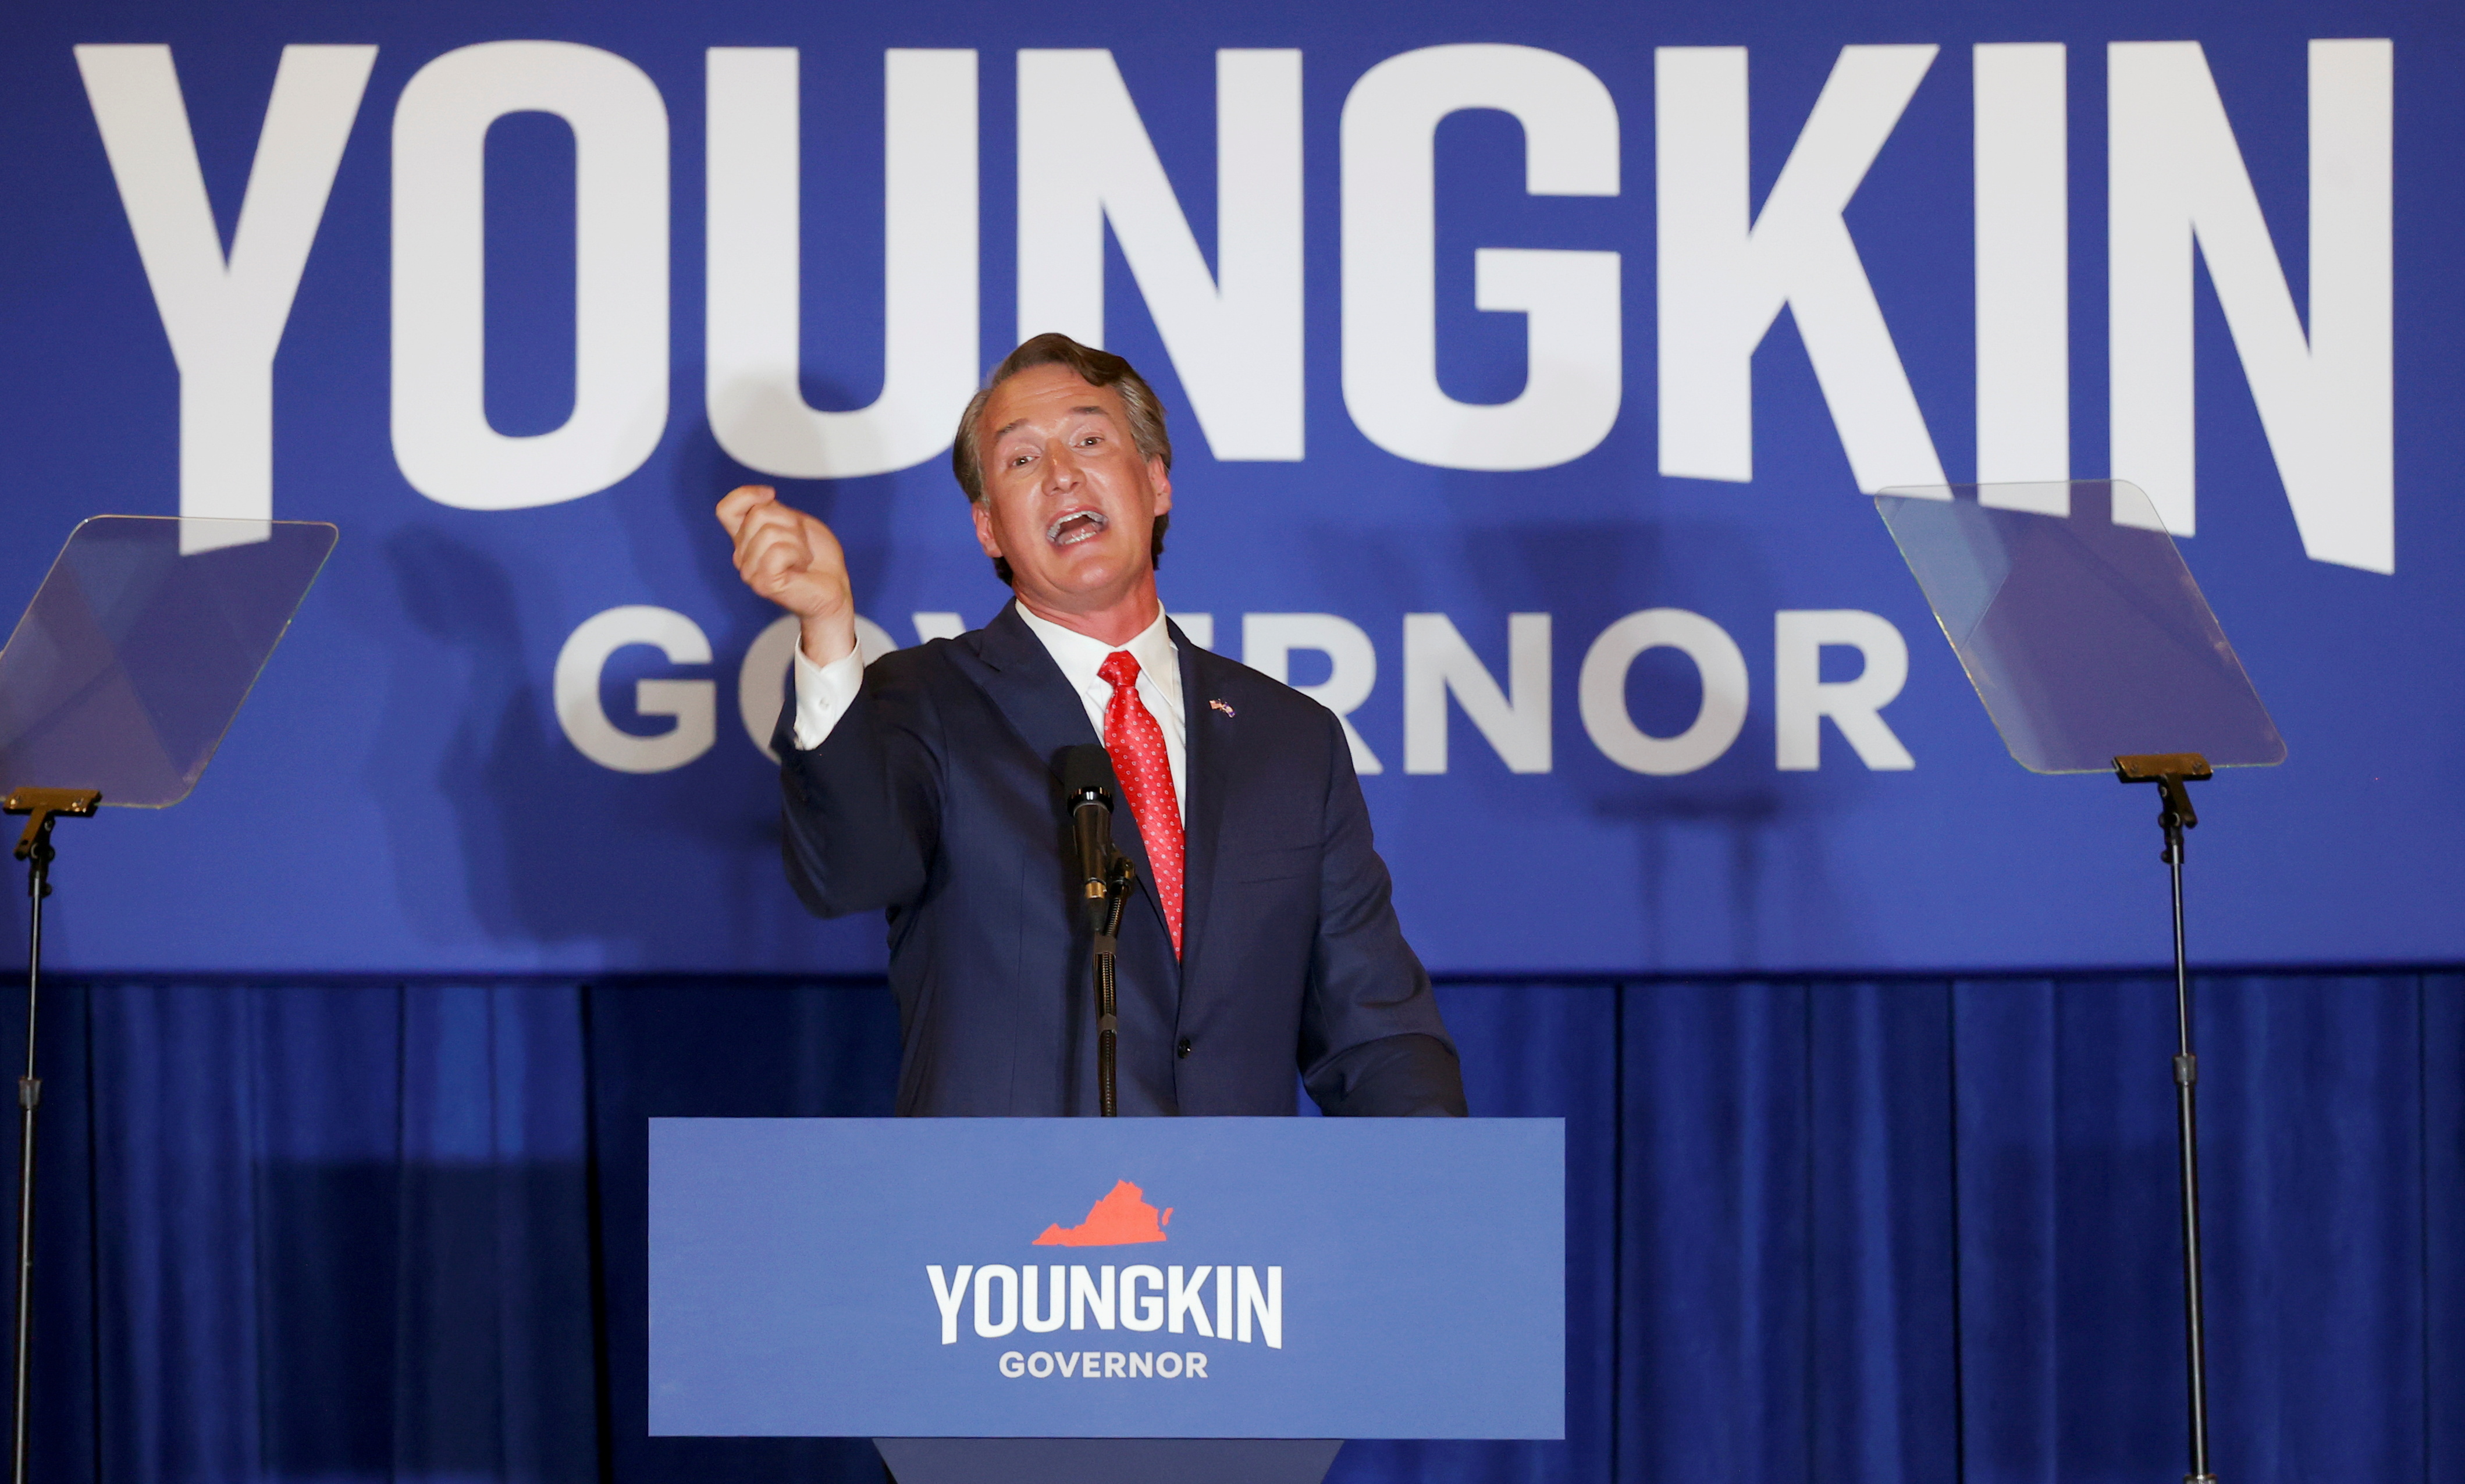 Republican Glenn Youngkin holds election night event in race for Virginia governor